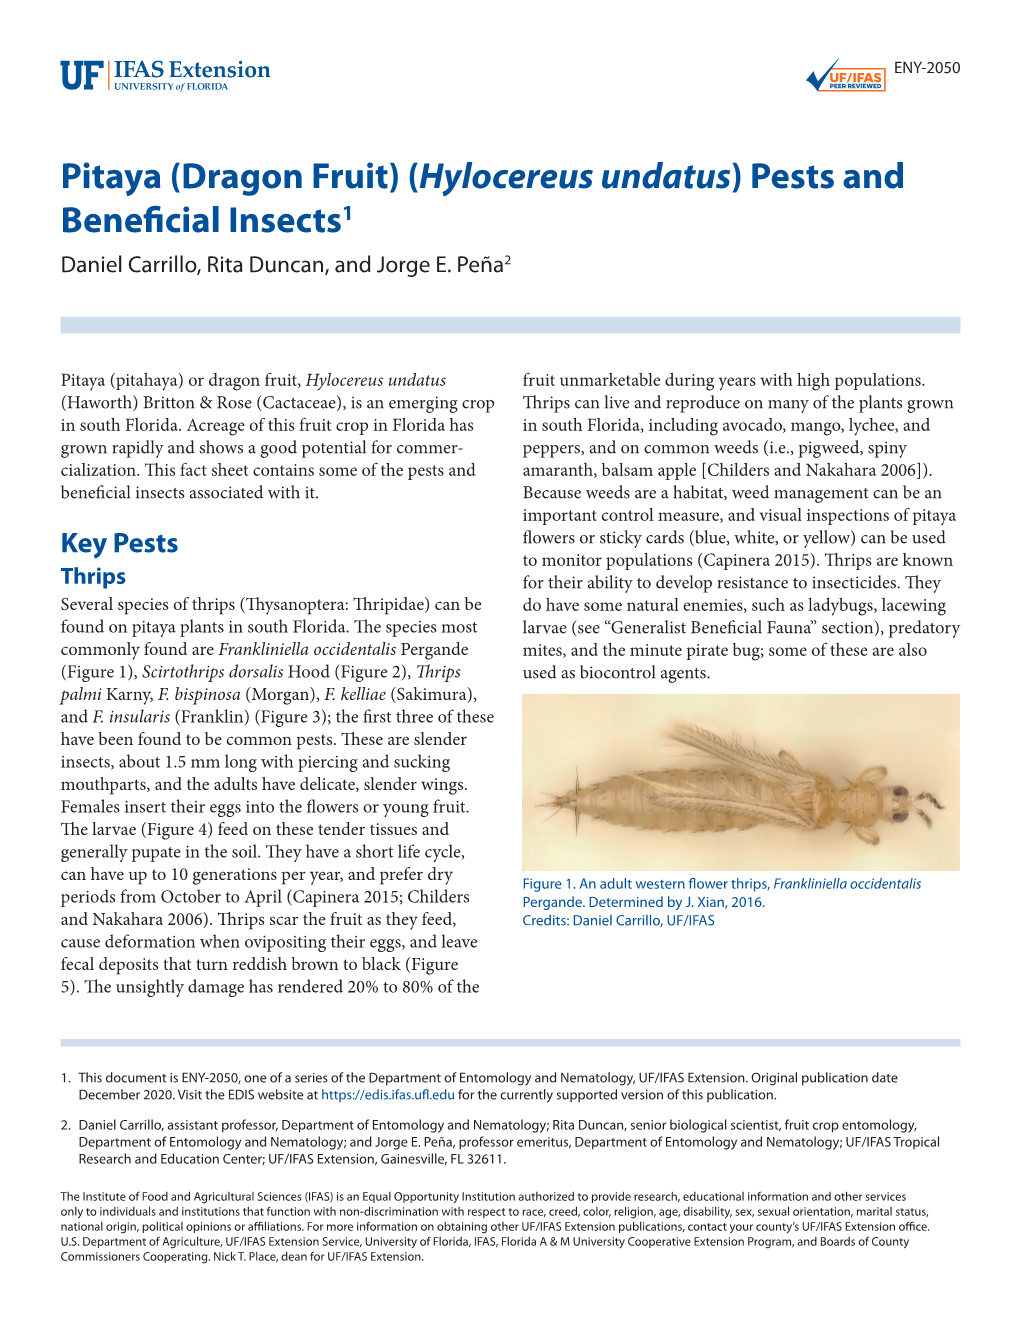 Pitaya (Dragon Fruit) (Hylocereus Undatus) Pests and Beneficial Insects1 Daniel Carrillo, Rita Duncan, and Jorge E